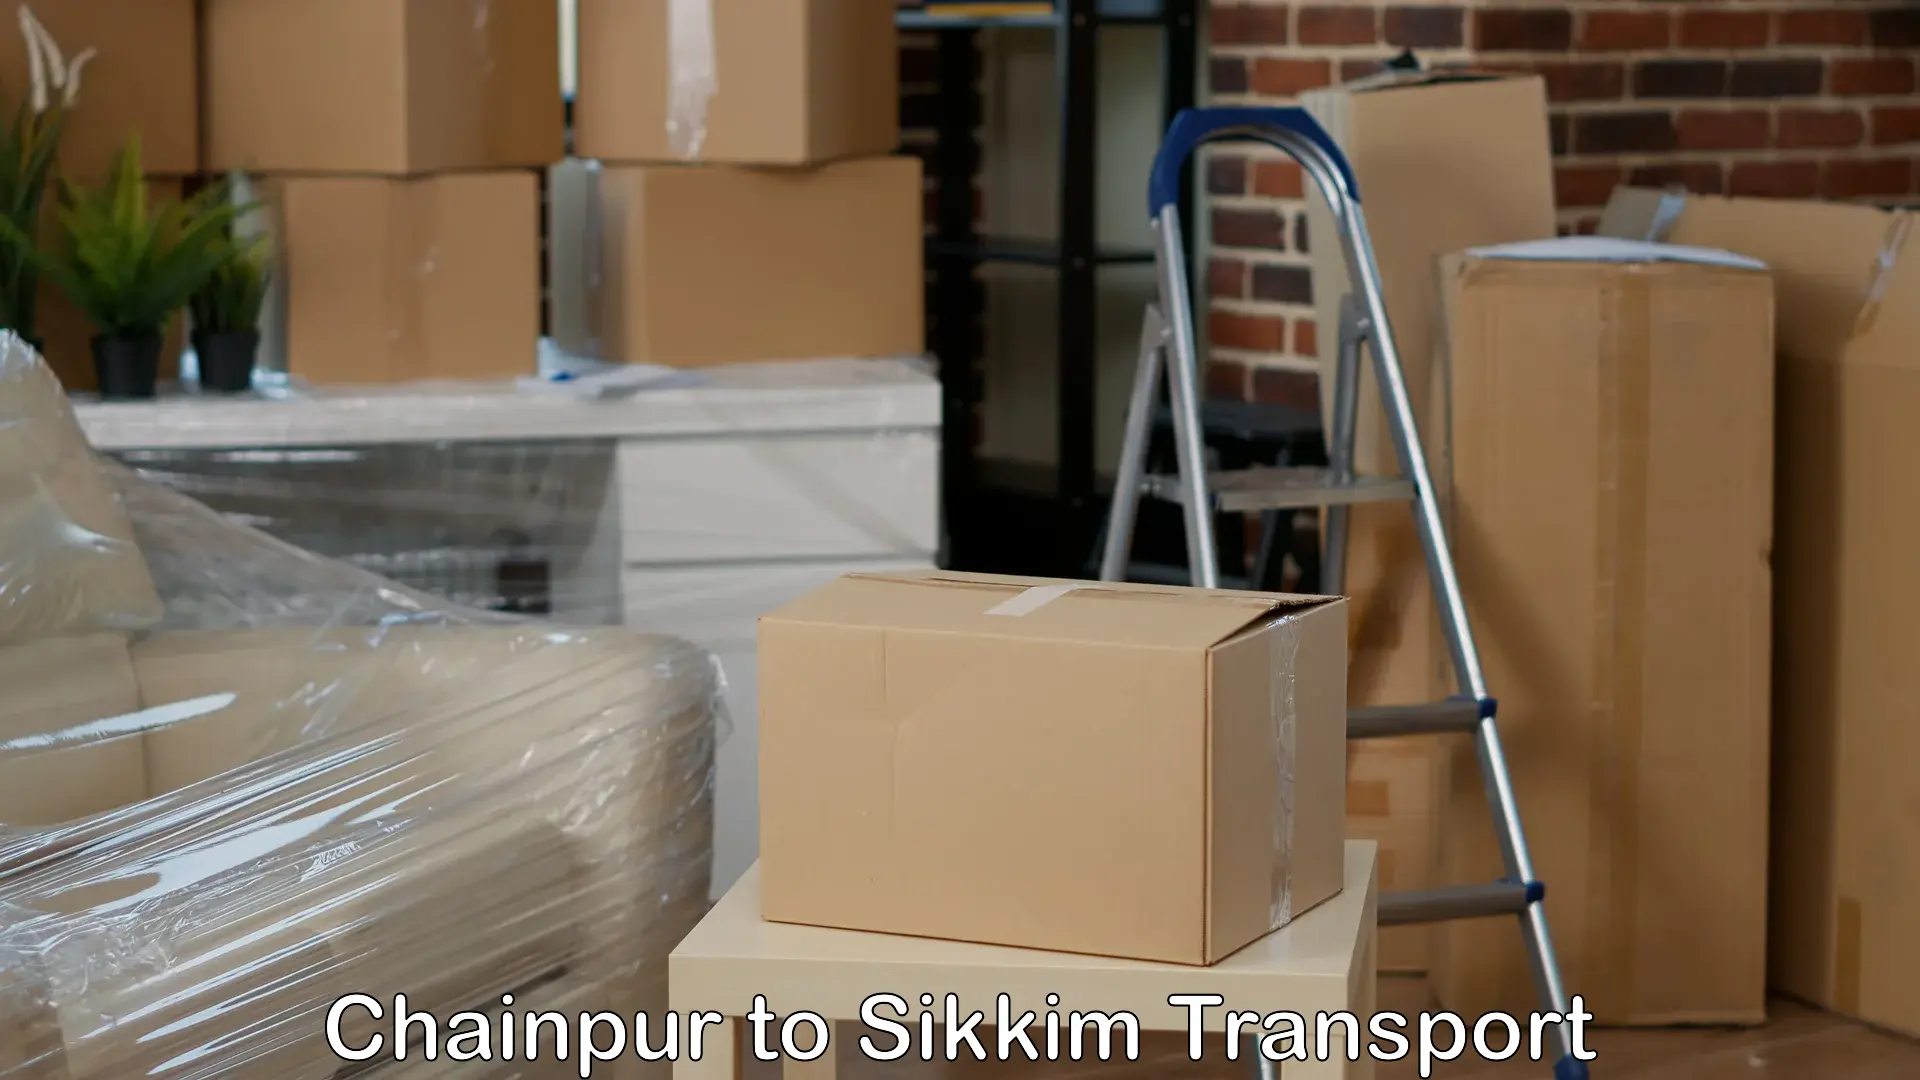 Truck transport companies in India Chainpur to Sikkim